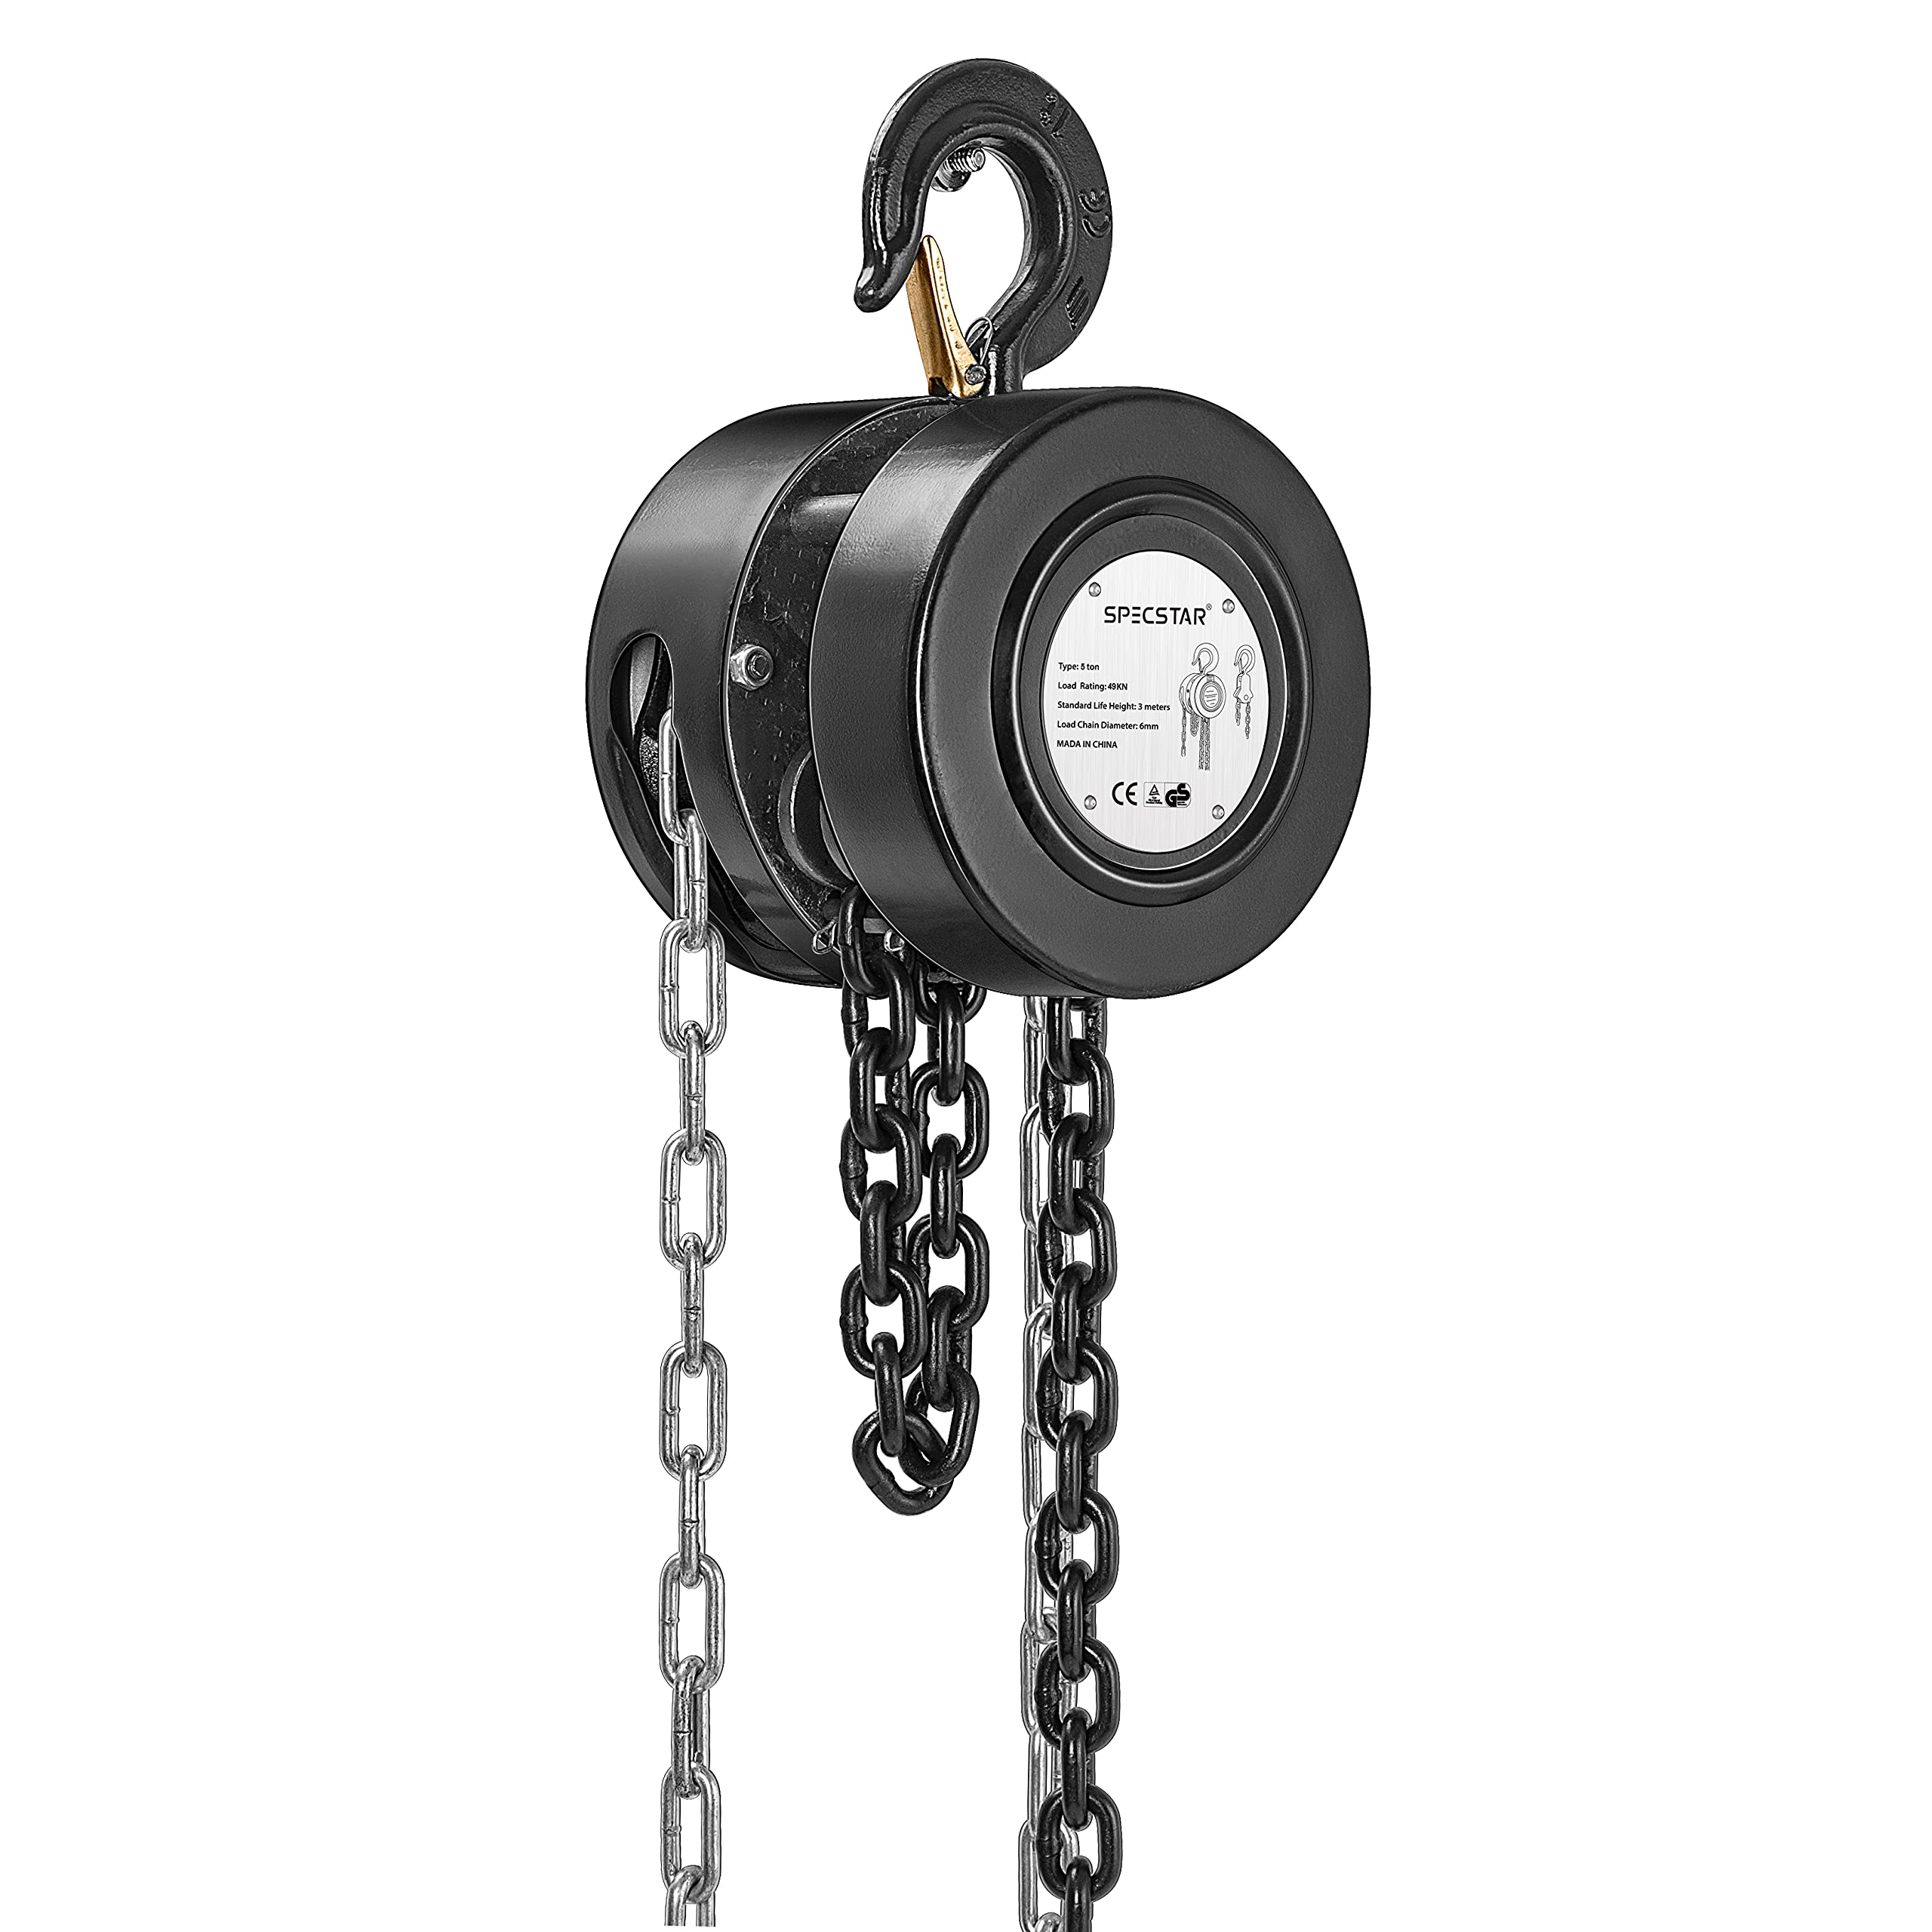 Prime day deal 68% off- $44.50 SPECSTAR 10 Feet Manual Hand Chain Block Hoist with 2 Hooks 5Ton Capacity Black